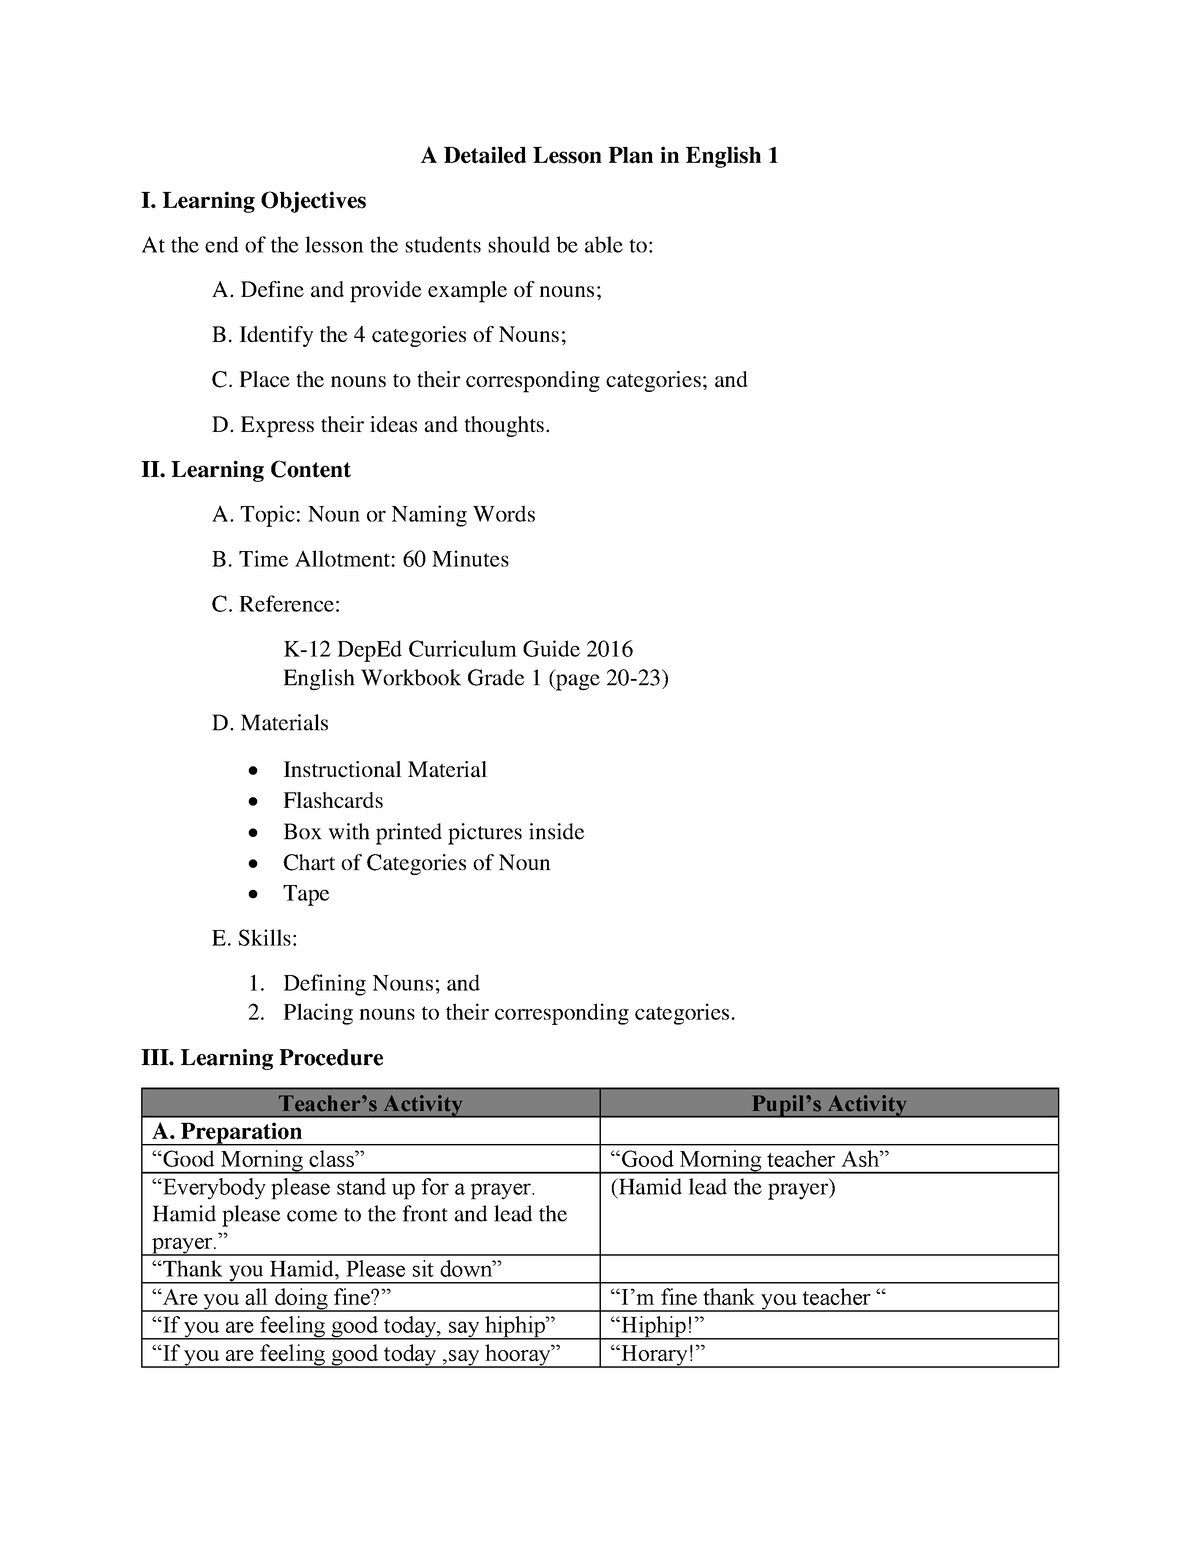 detailed-lesson-plan-in-english-grade-1-a-detailed-lesson-plan-in